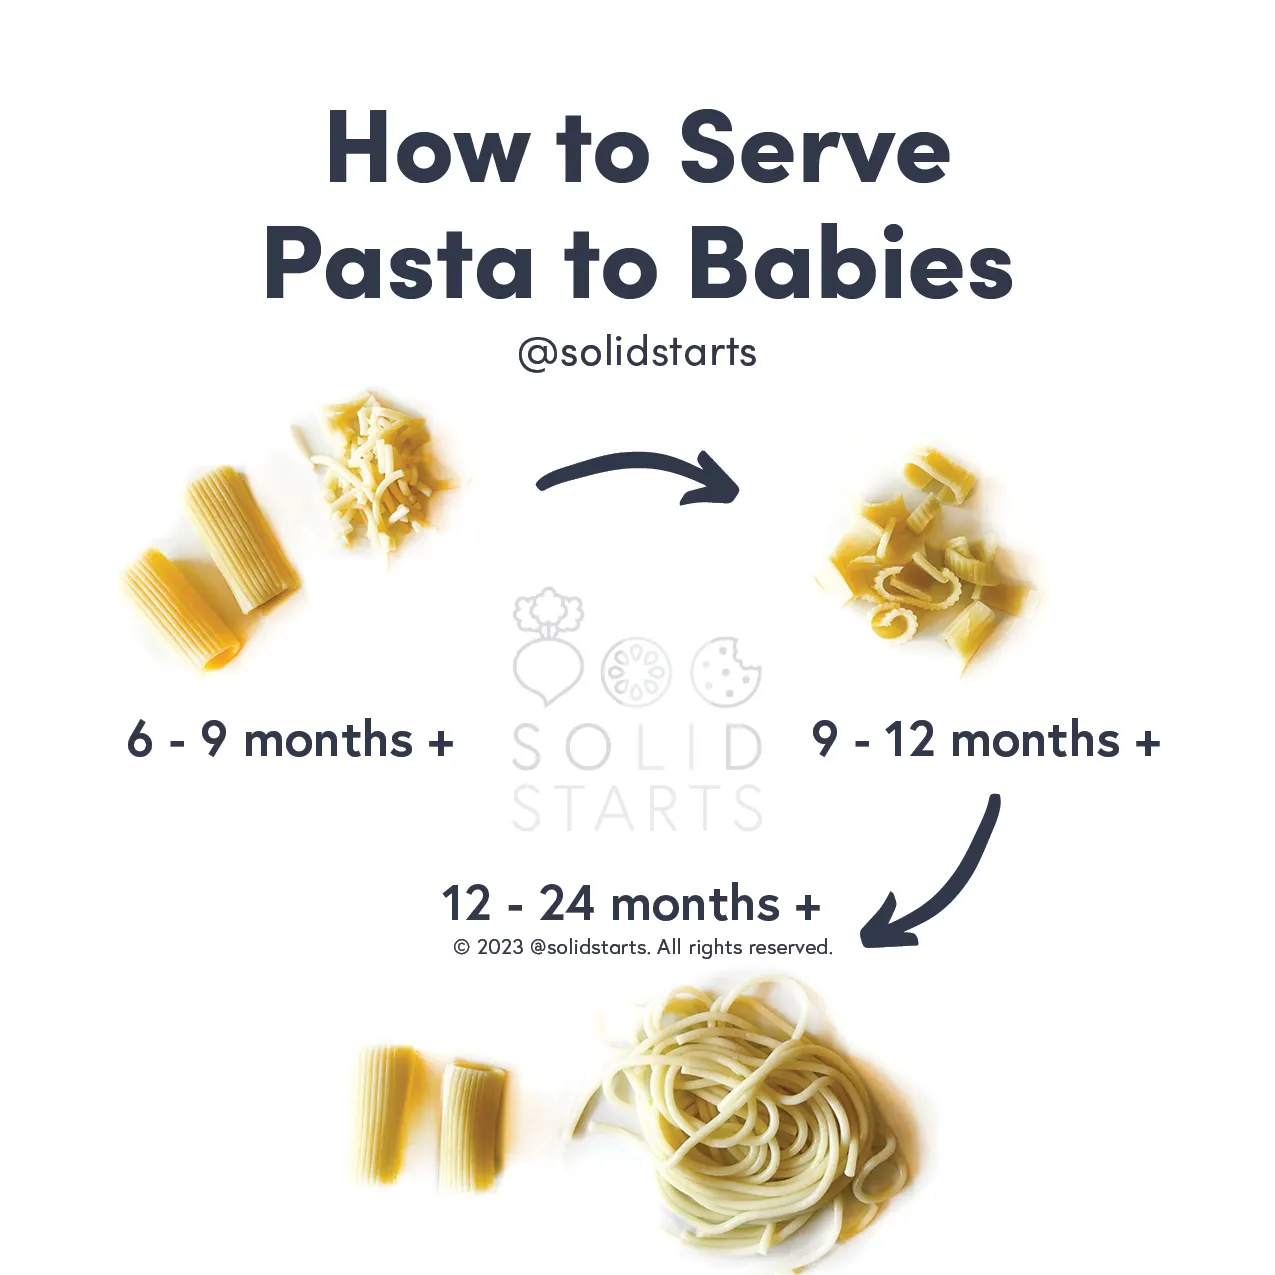 How to Serve Pasta to Babies infographic